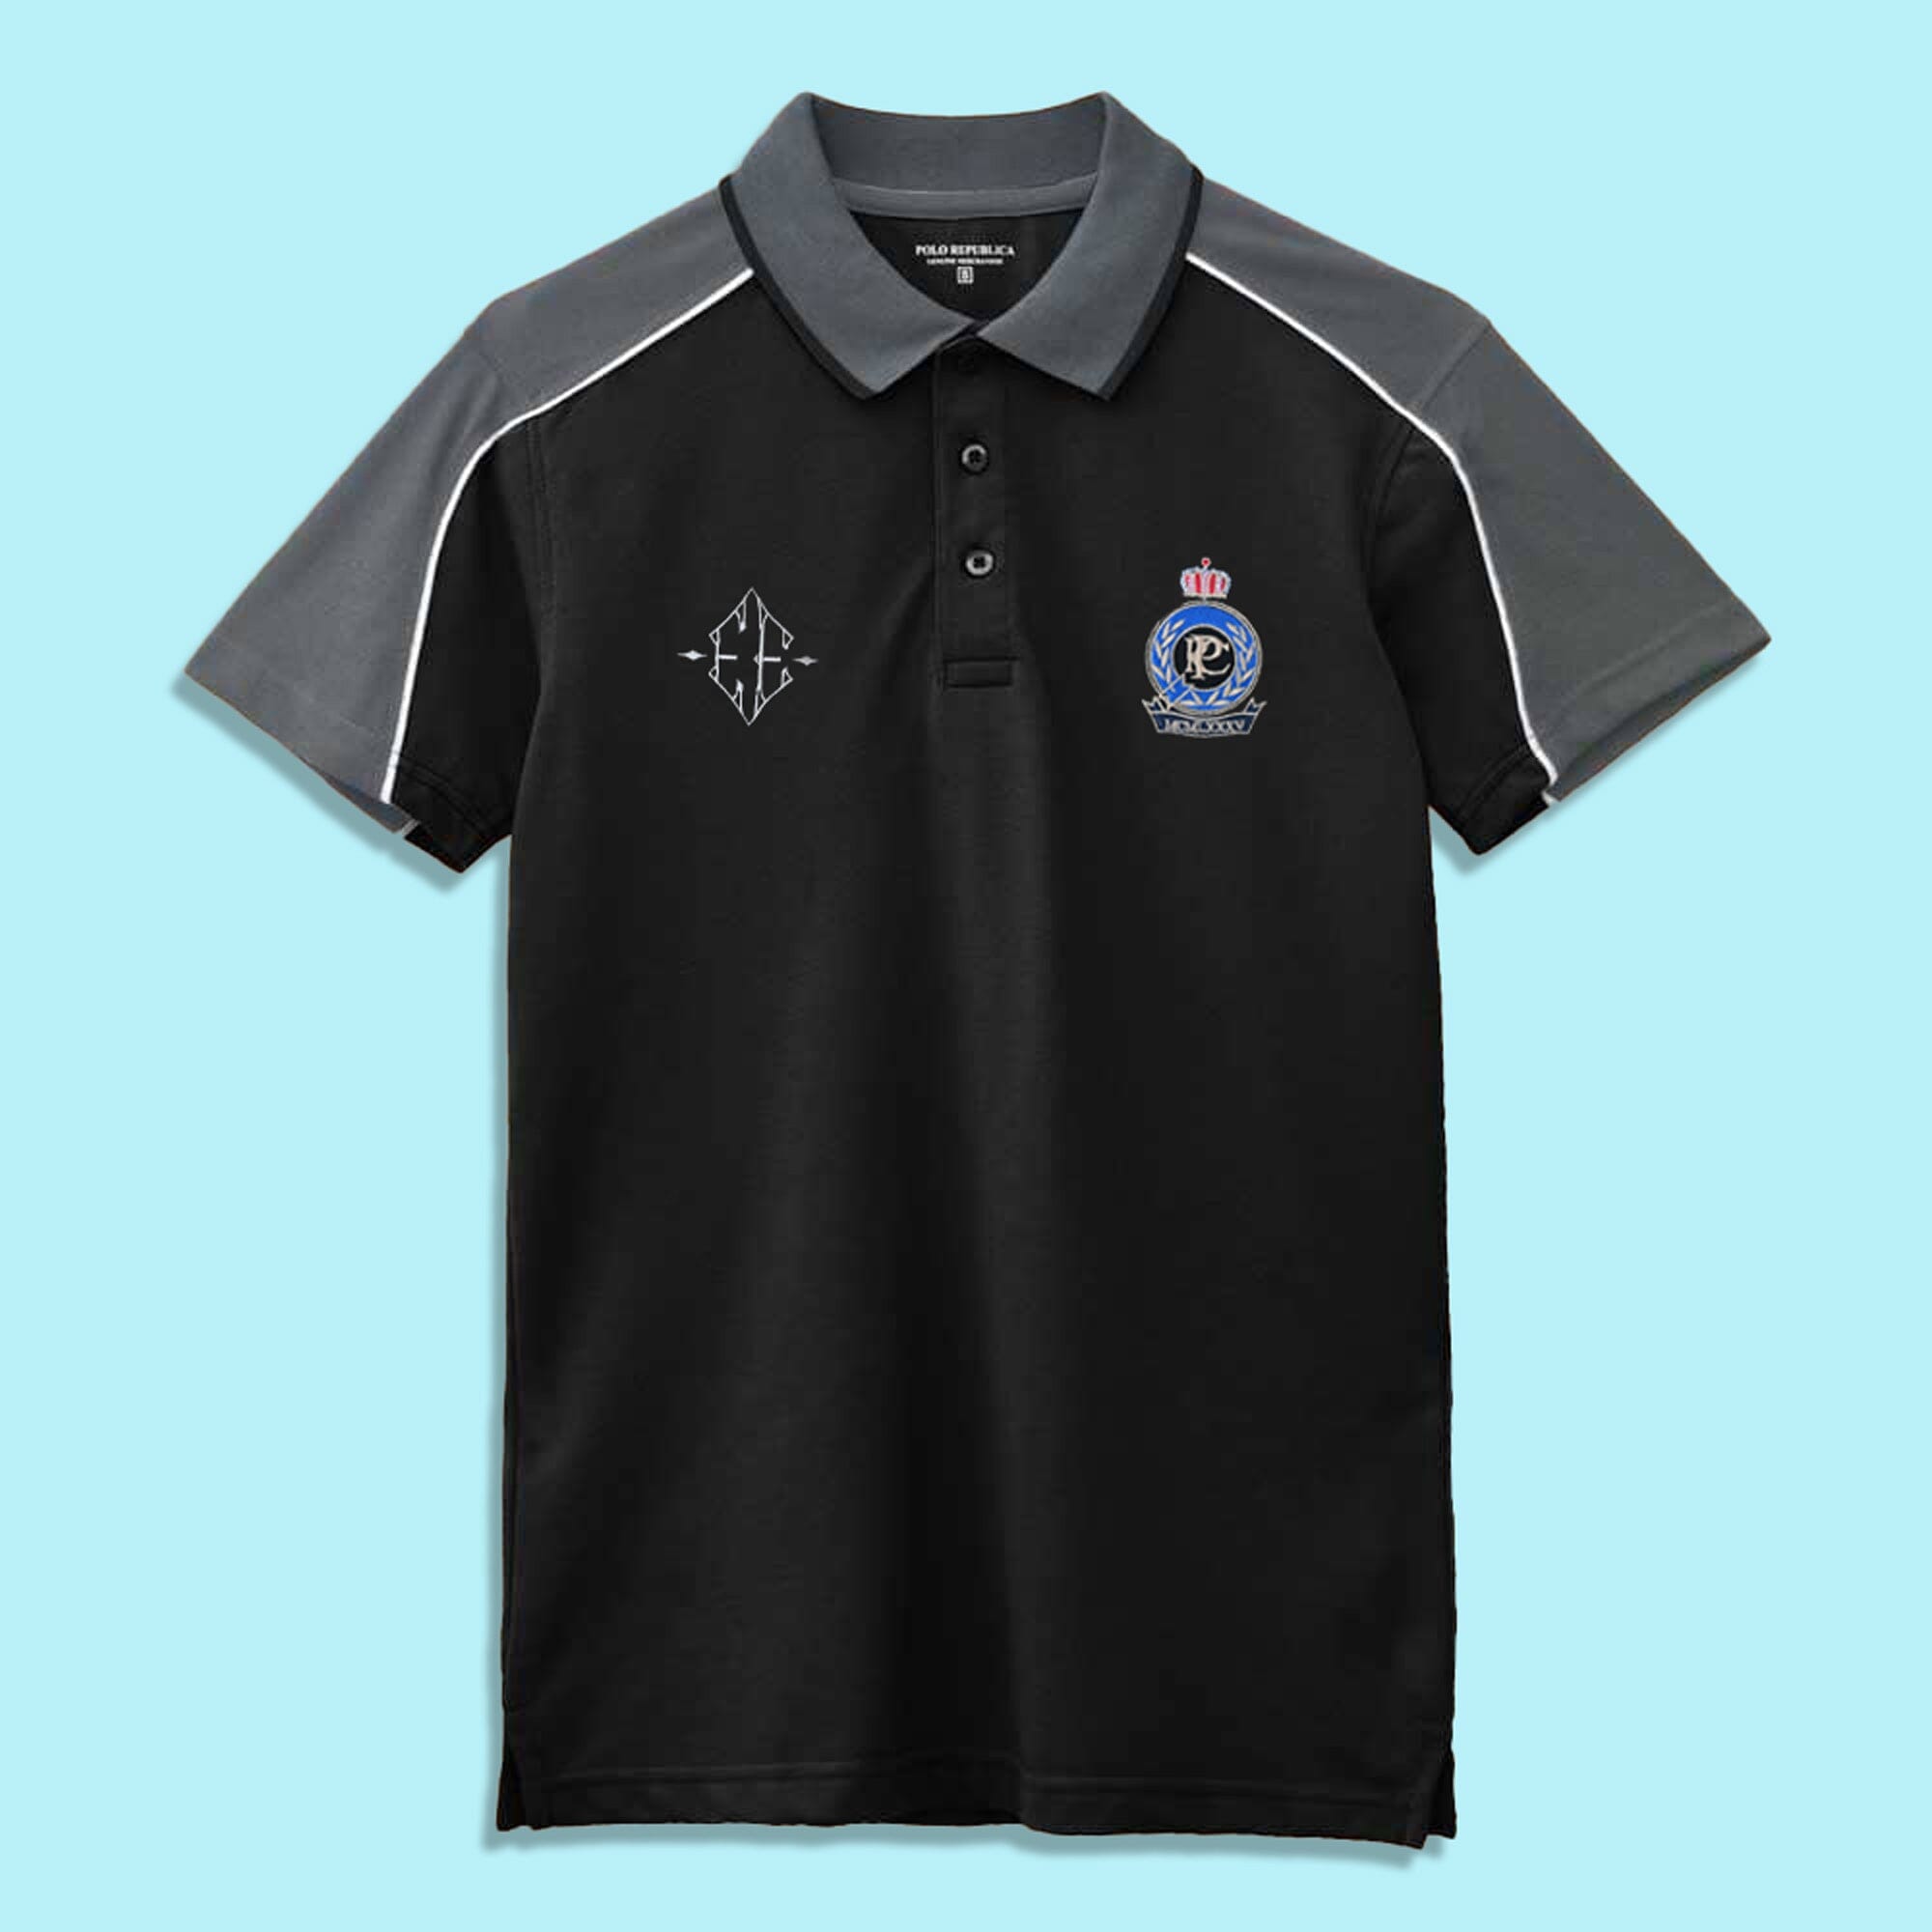 Polo Republica Men's PRC Crest & EE Embroidered Contrast Panels Polo S